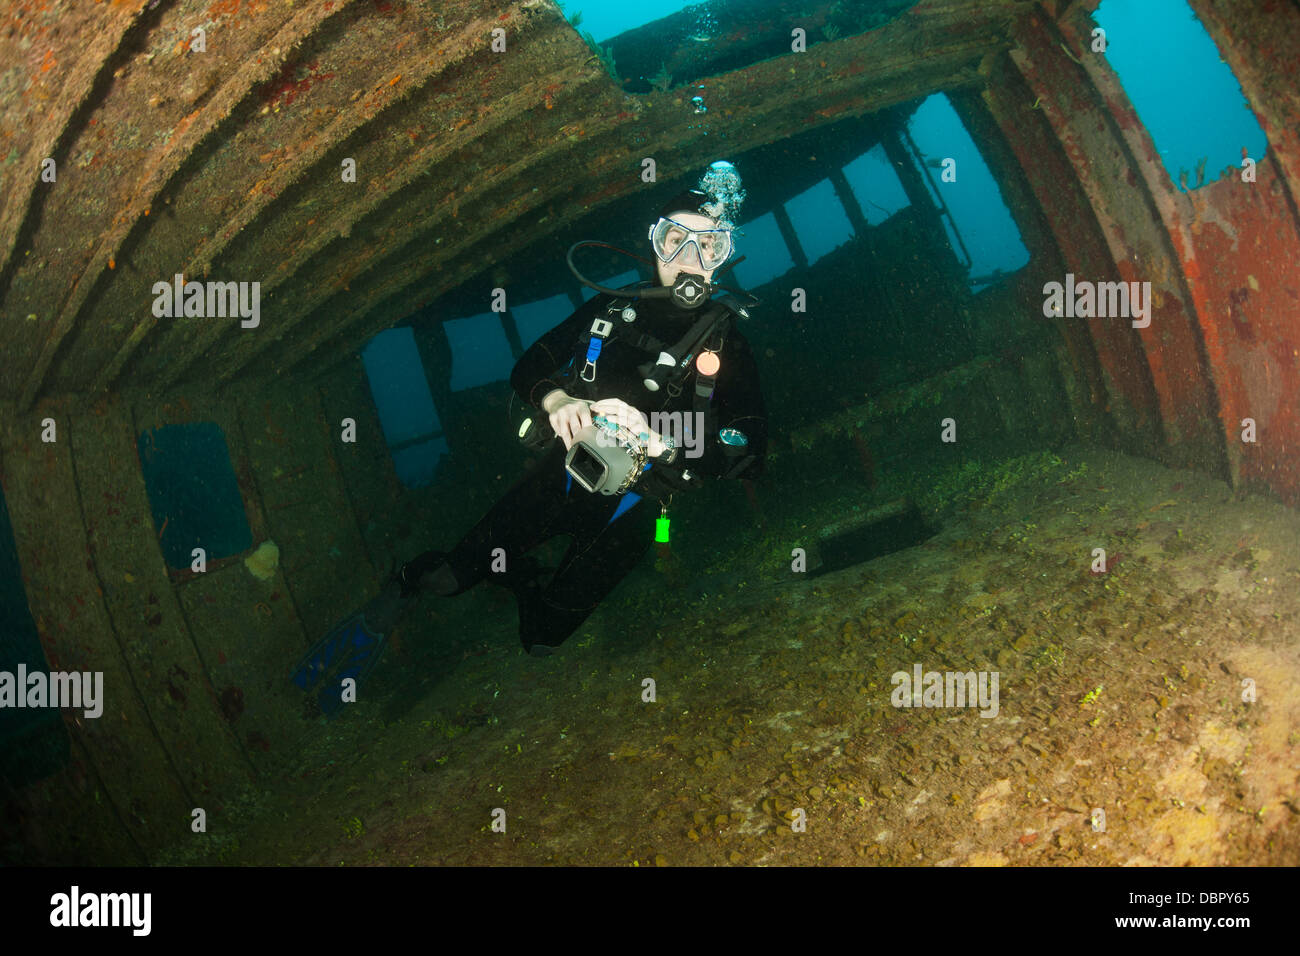 Scuba diver inside the wreck of the Mr. Bud, a former shrimping boat, scuttled off the island of Roatan, Honduras Stock Photo